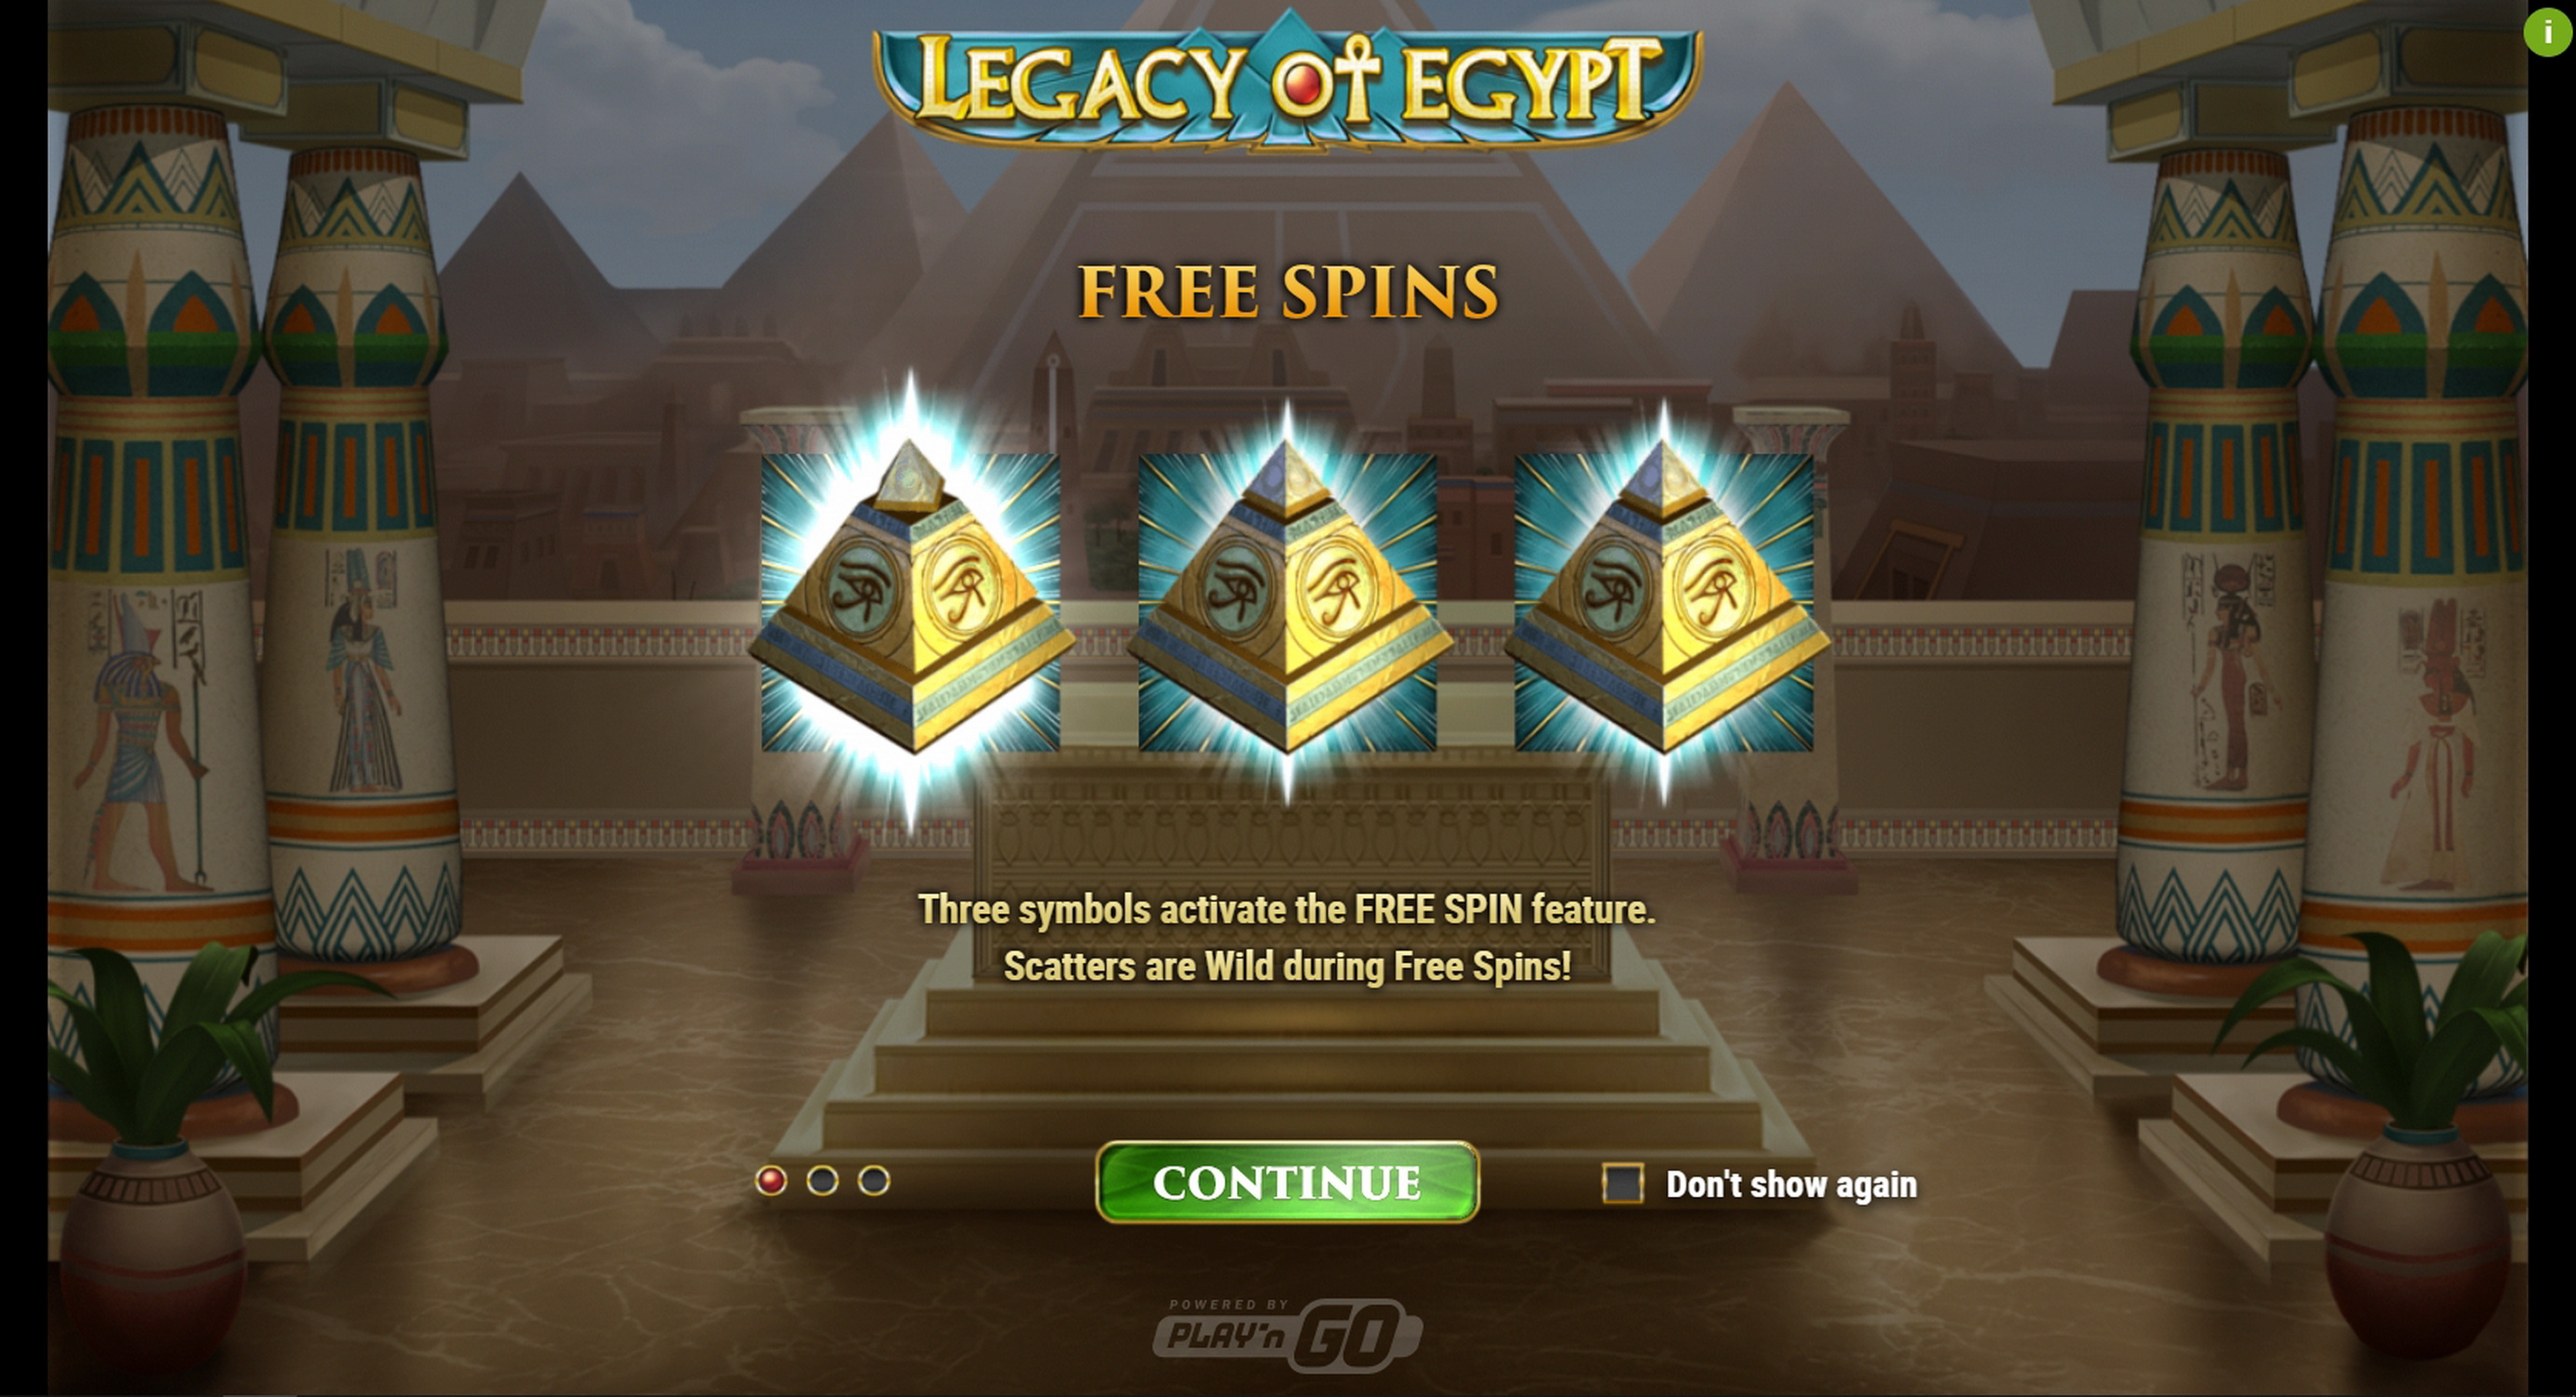 Play Legacy Of Egypt Free Casino Slot Game by Playn GO